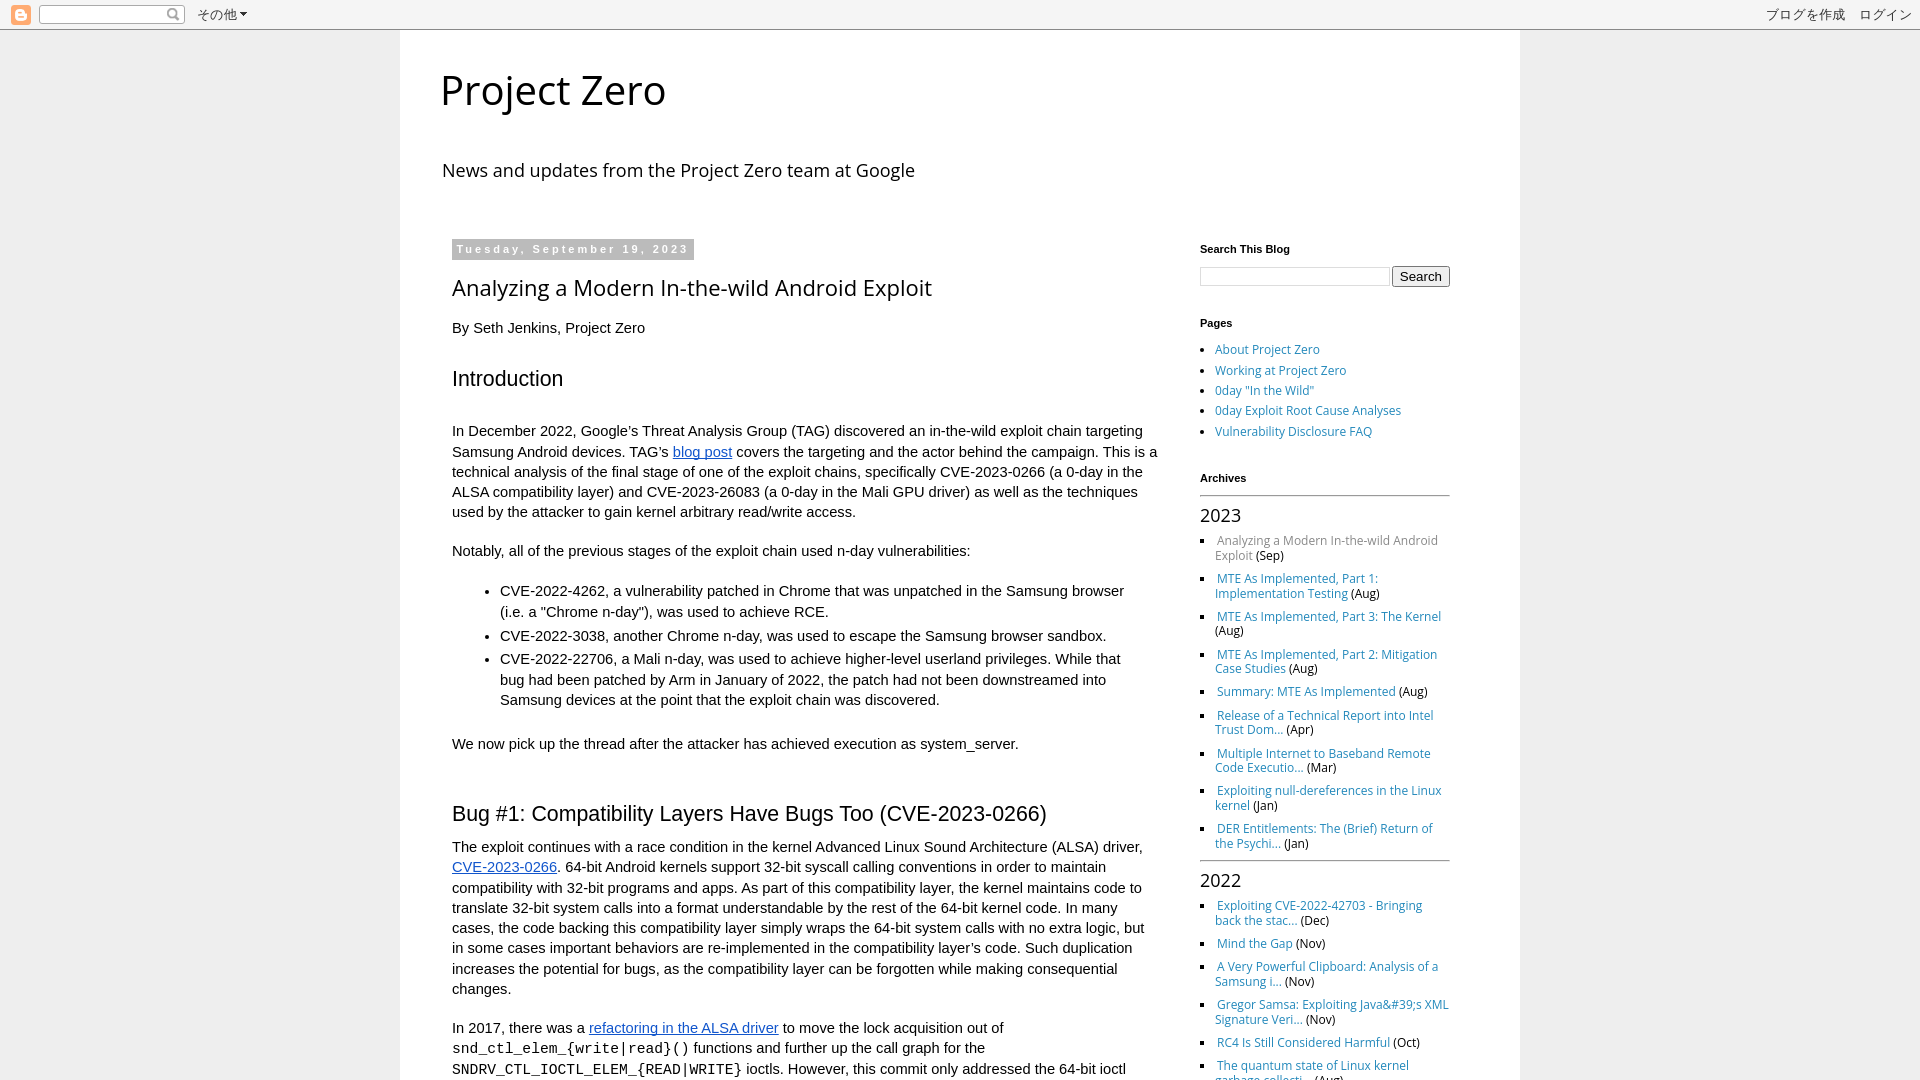 Project Zero: Analyzing a Modern In-the-wild Android Exploit